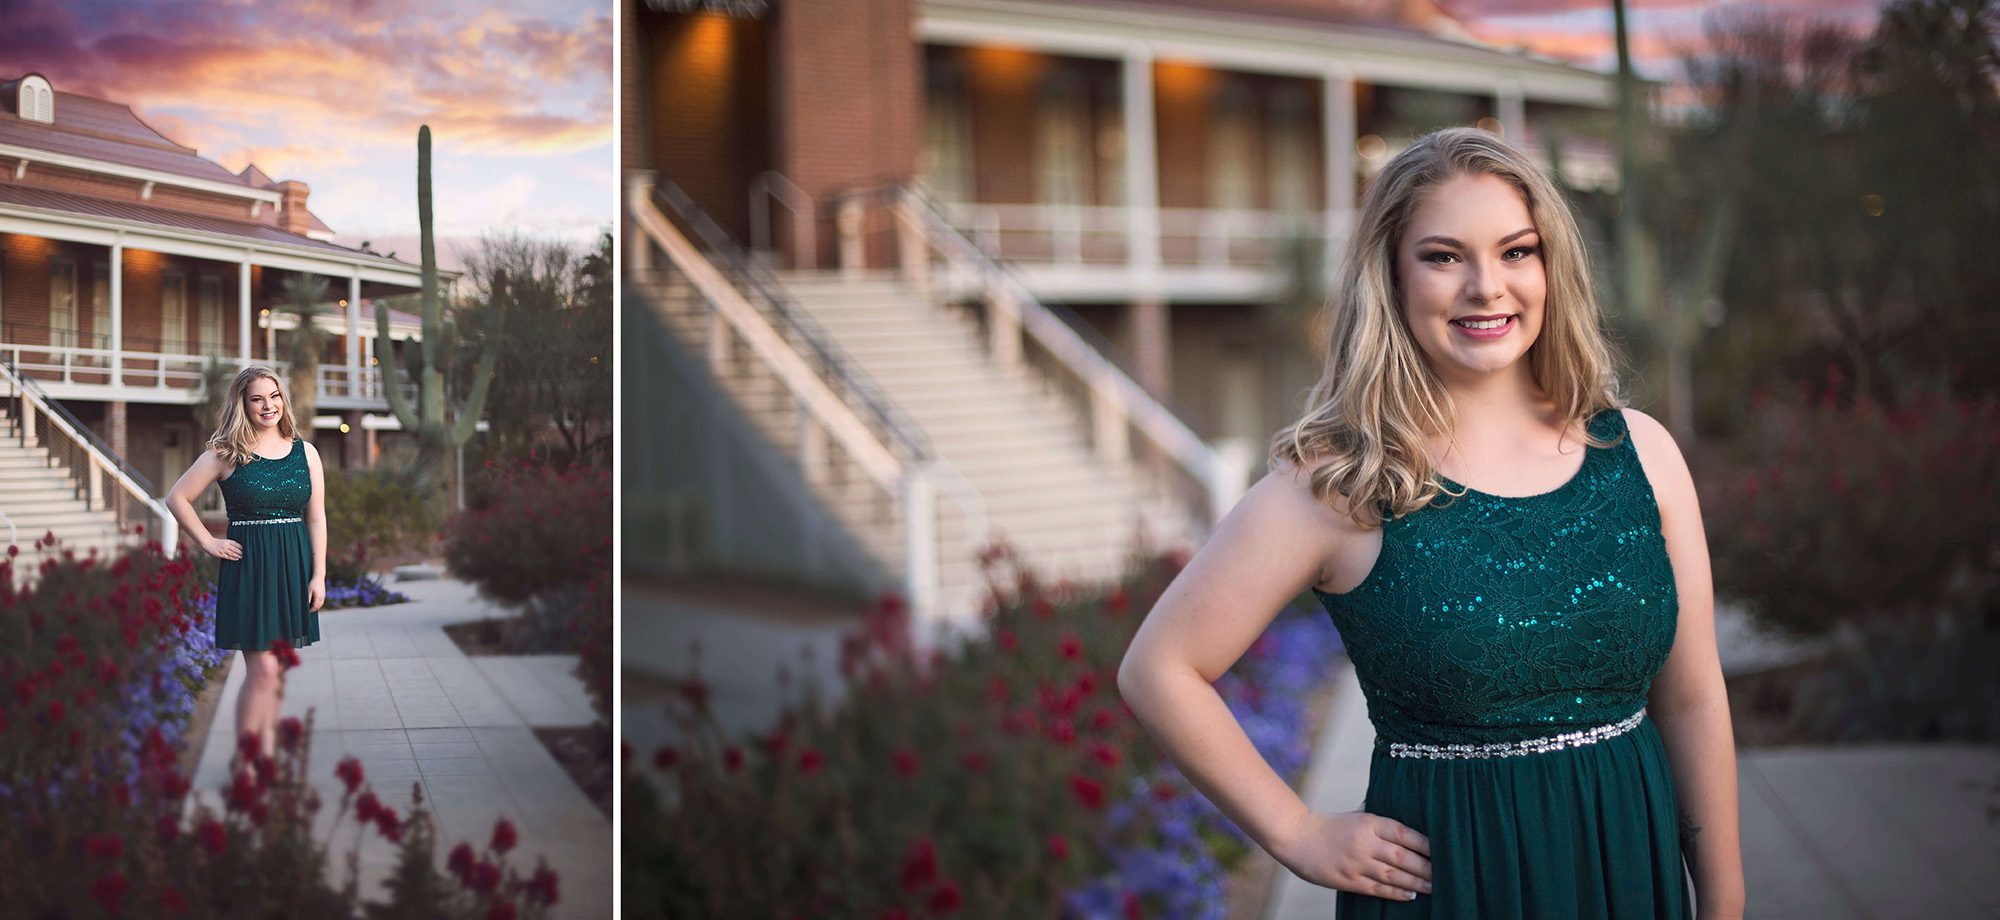 Olivia glamorously stands in front of the Old Main building at the University of Arizona with a glorious sunset and tall flowers framing her during her senior portrait session